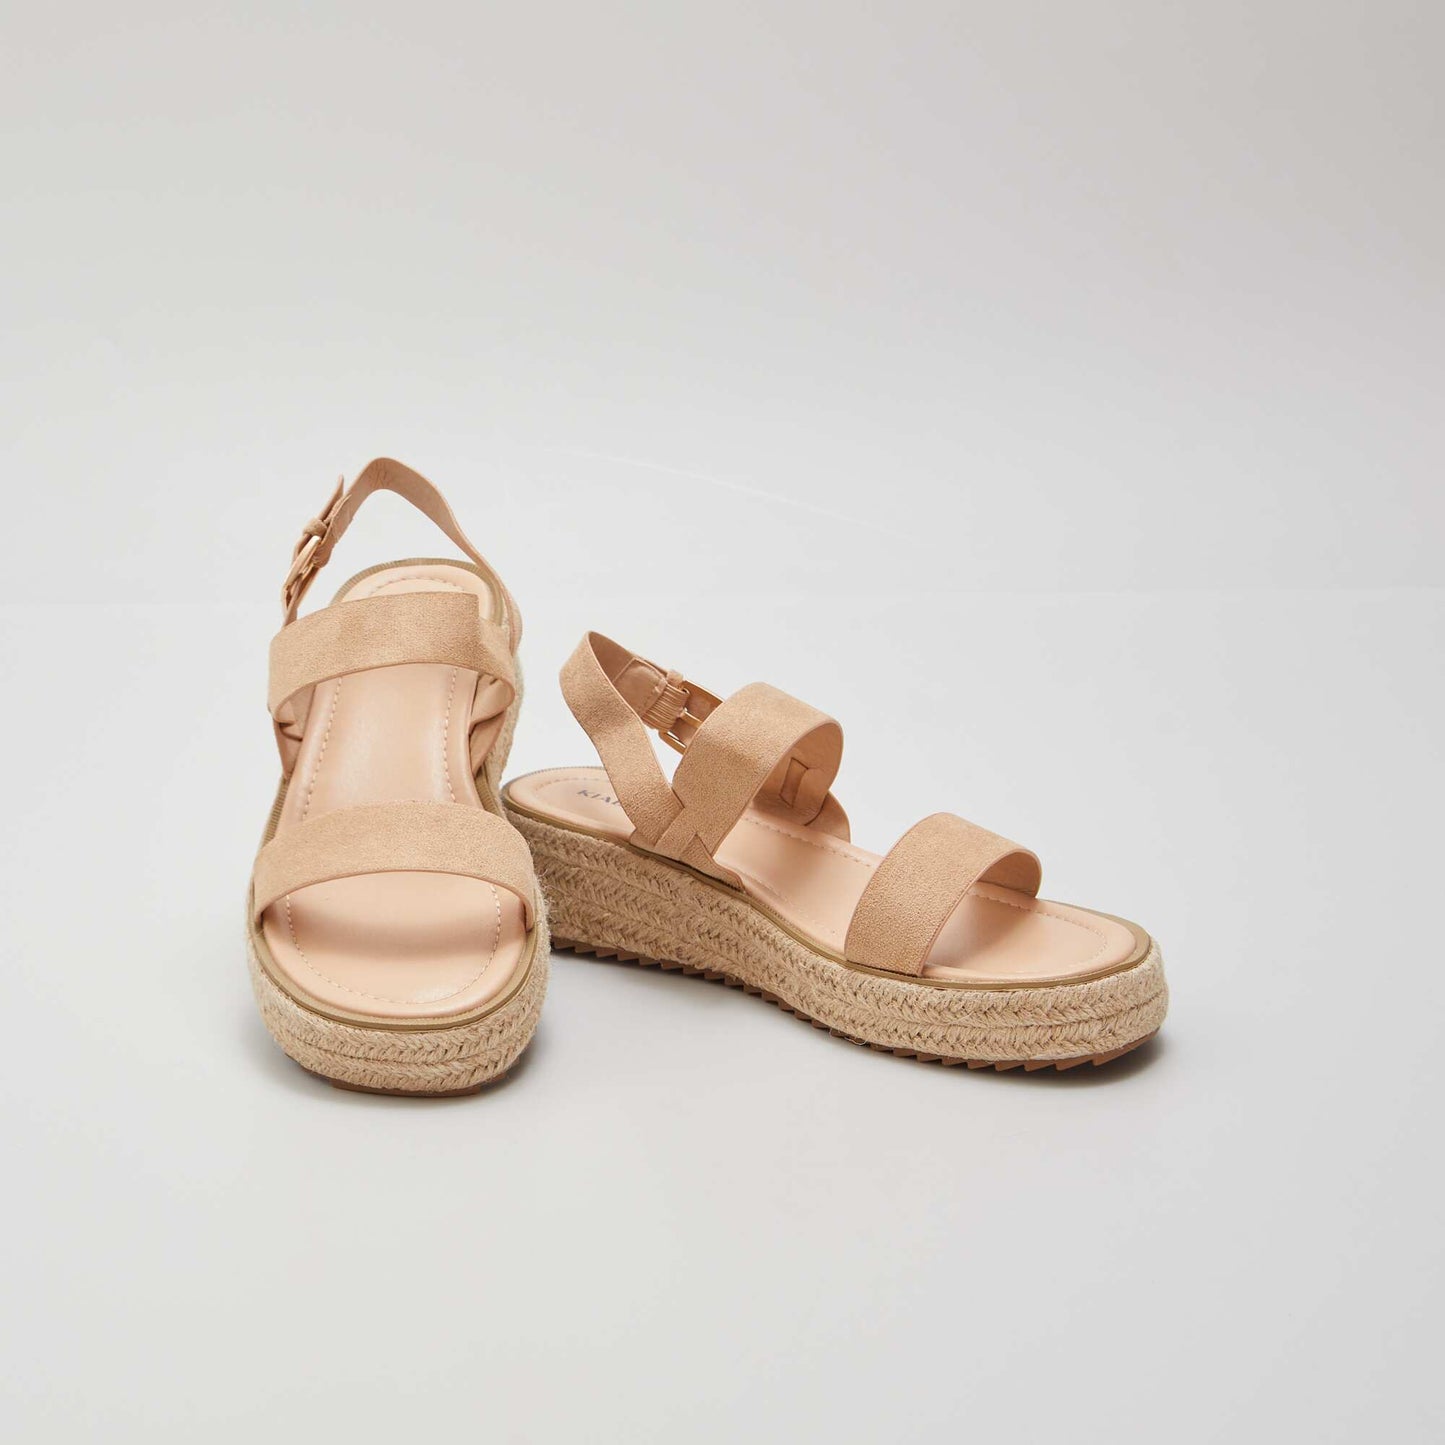 Platform sandals with rope sole YELLOW